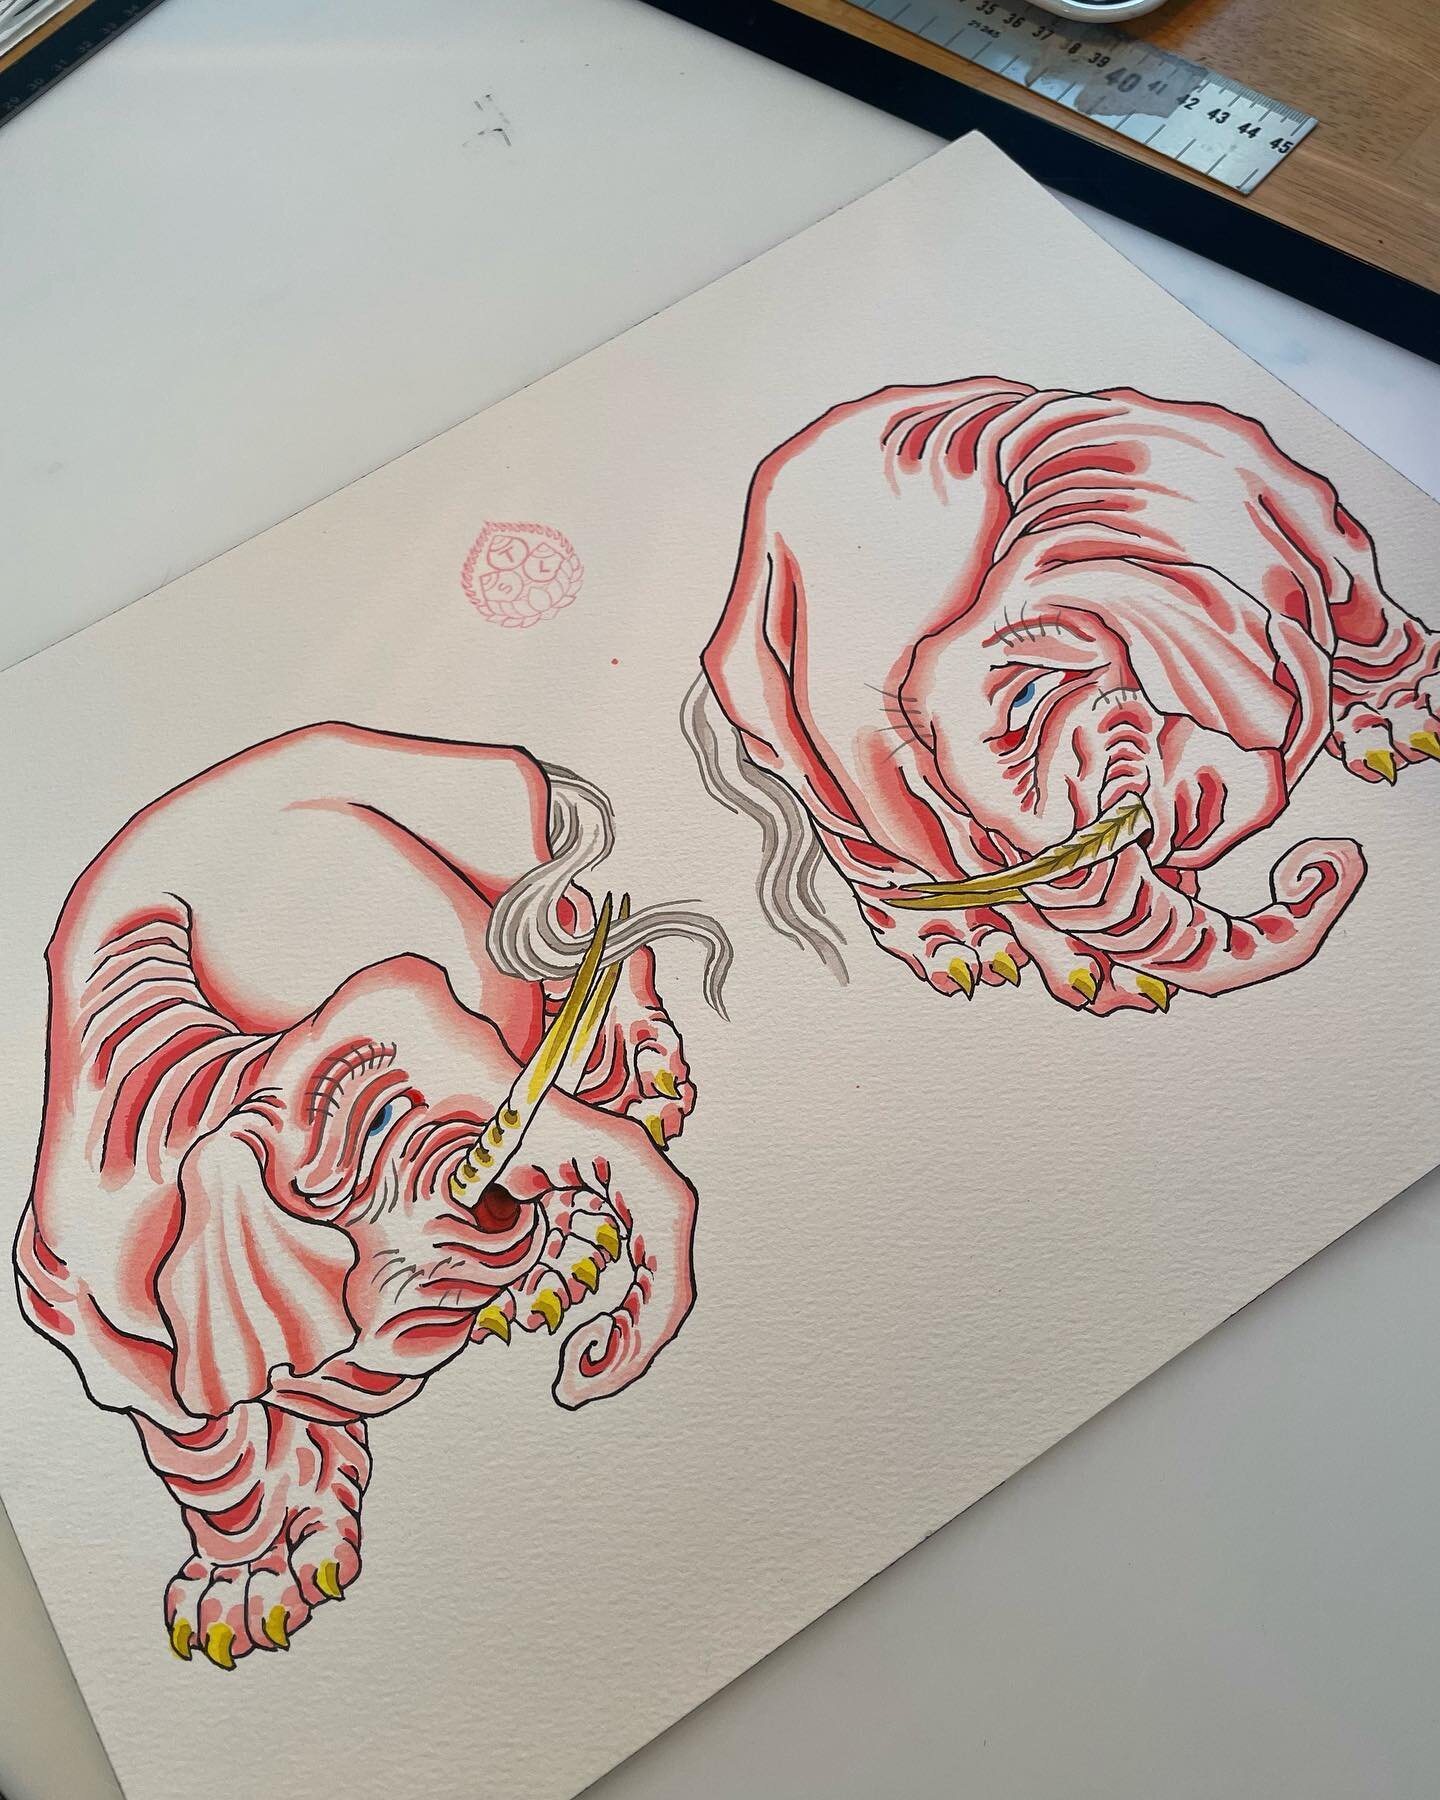 🩷 Pair of cheeky pink elephants🩷
*******************************************
Available to be tattooed @hotlinetattoo 🍒🎲
&bull;
&bull;
&bull;
&bull;
&bull;
#hokusai